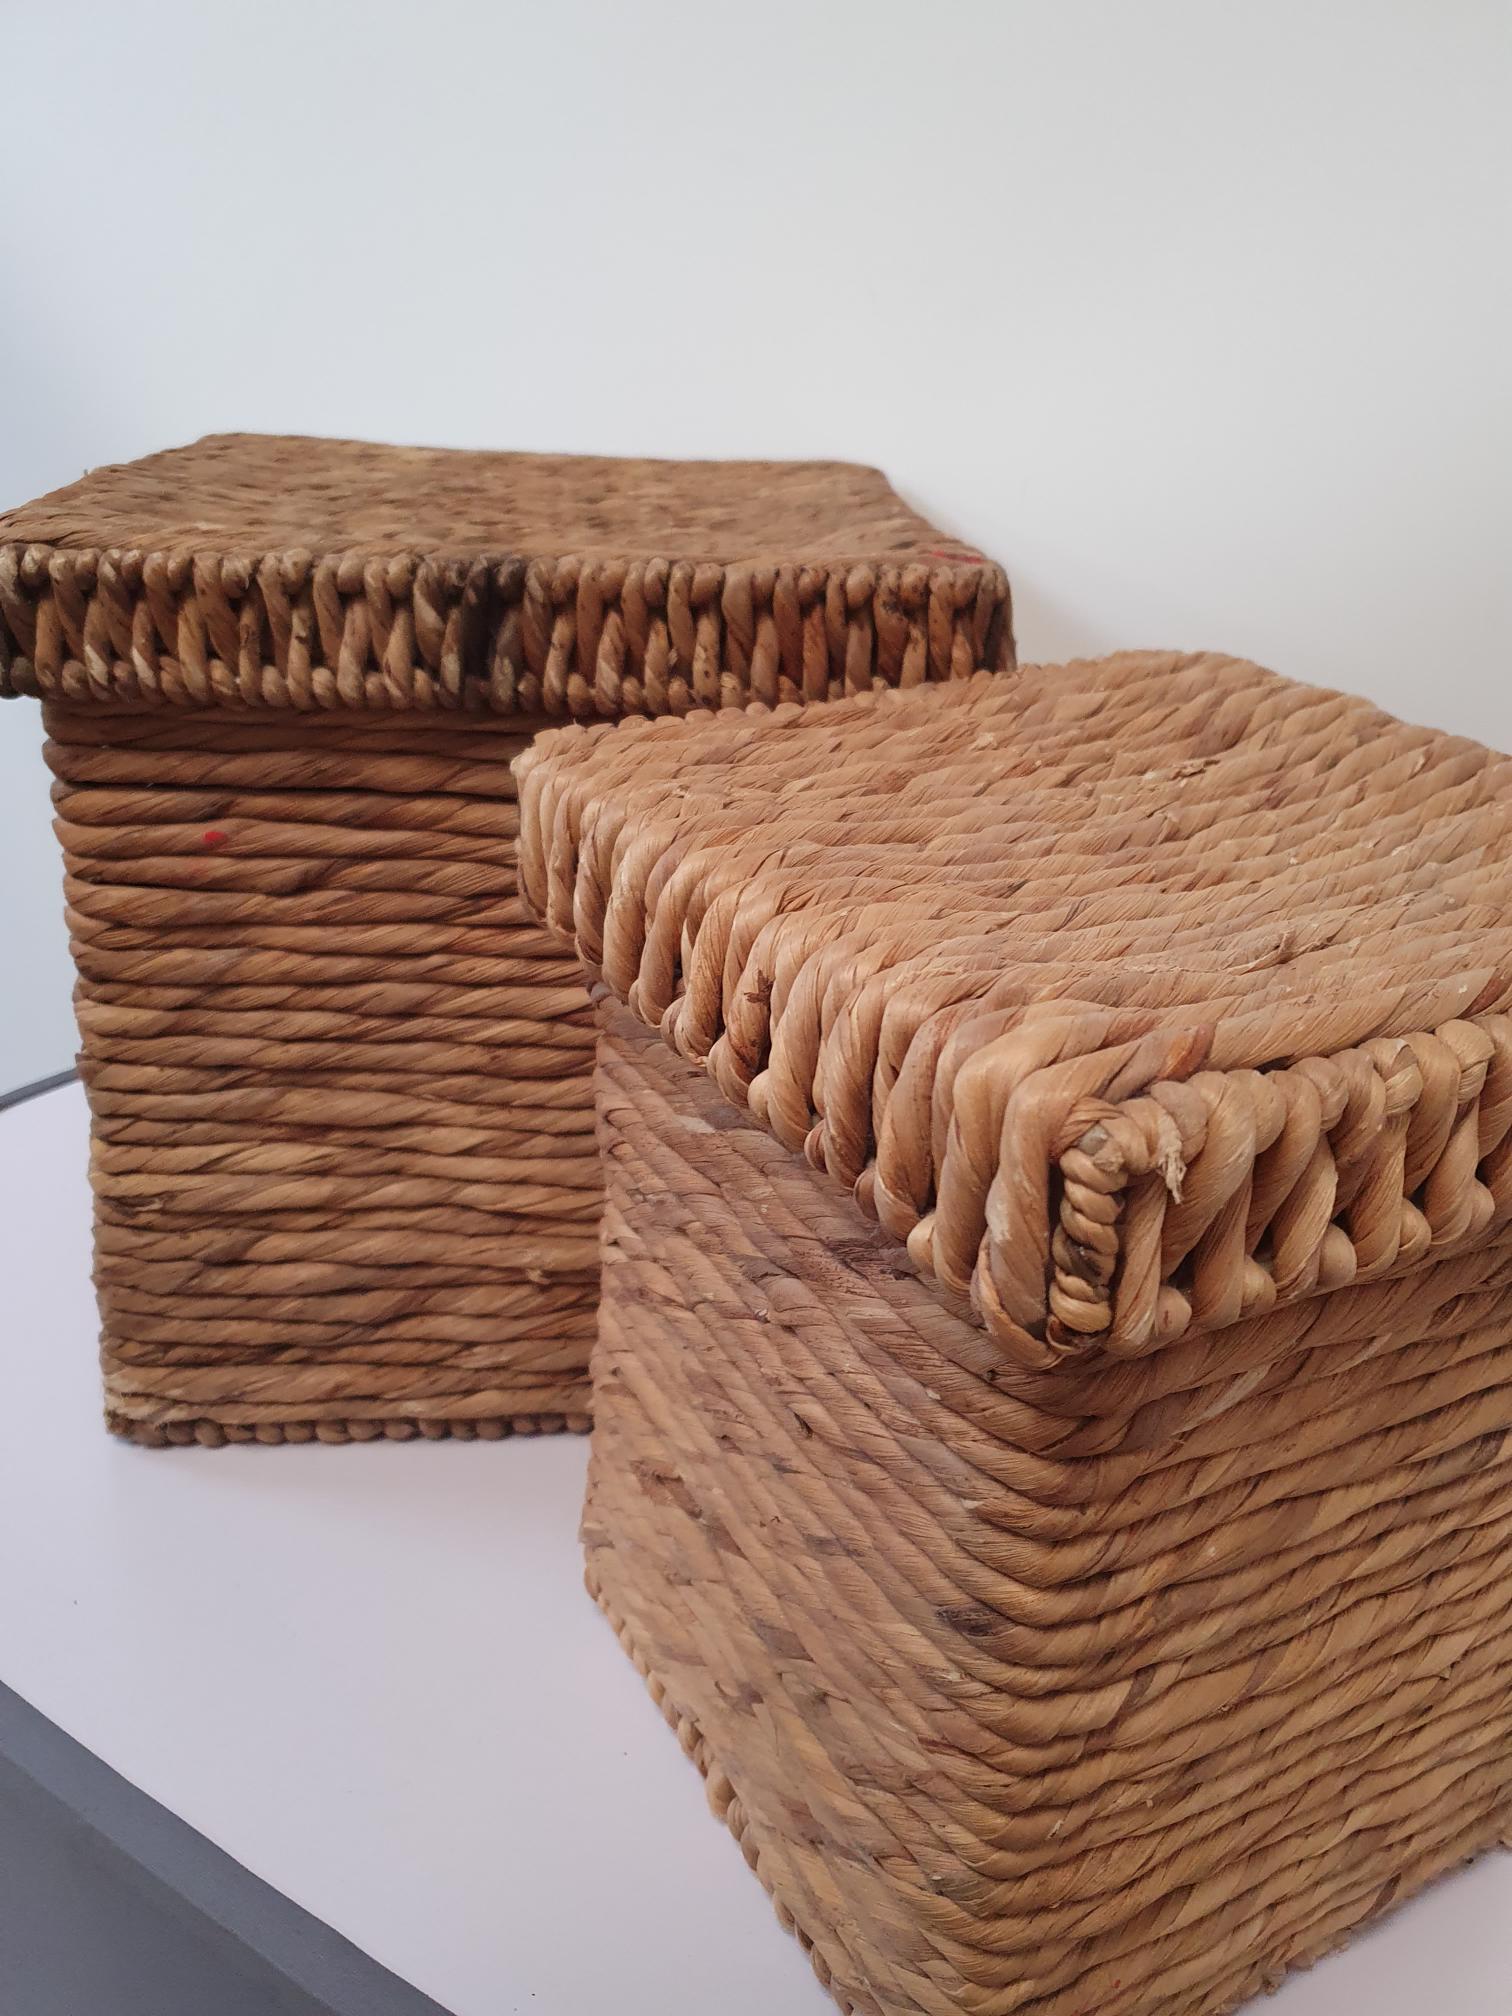 Wicker Pair Baskets - Image 3 of 6